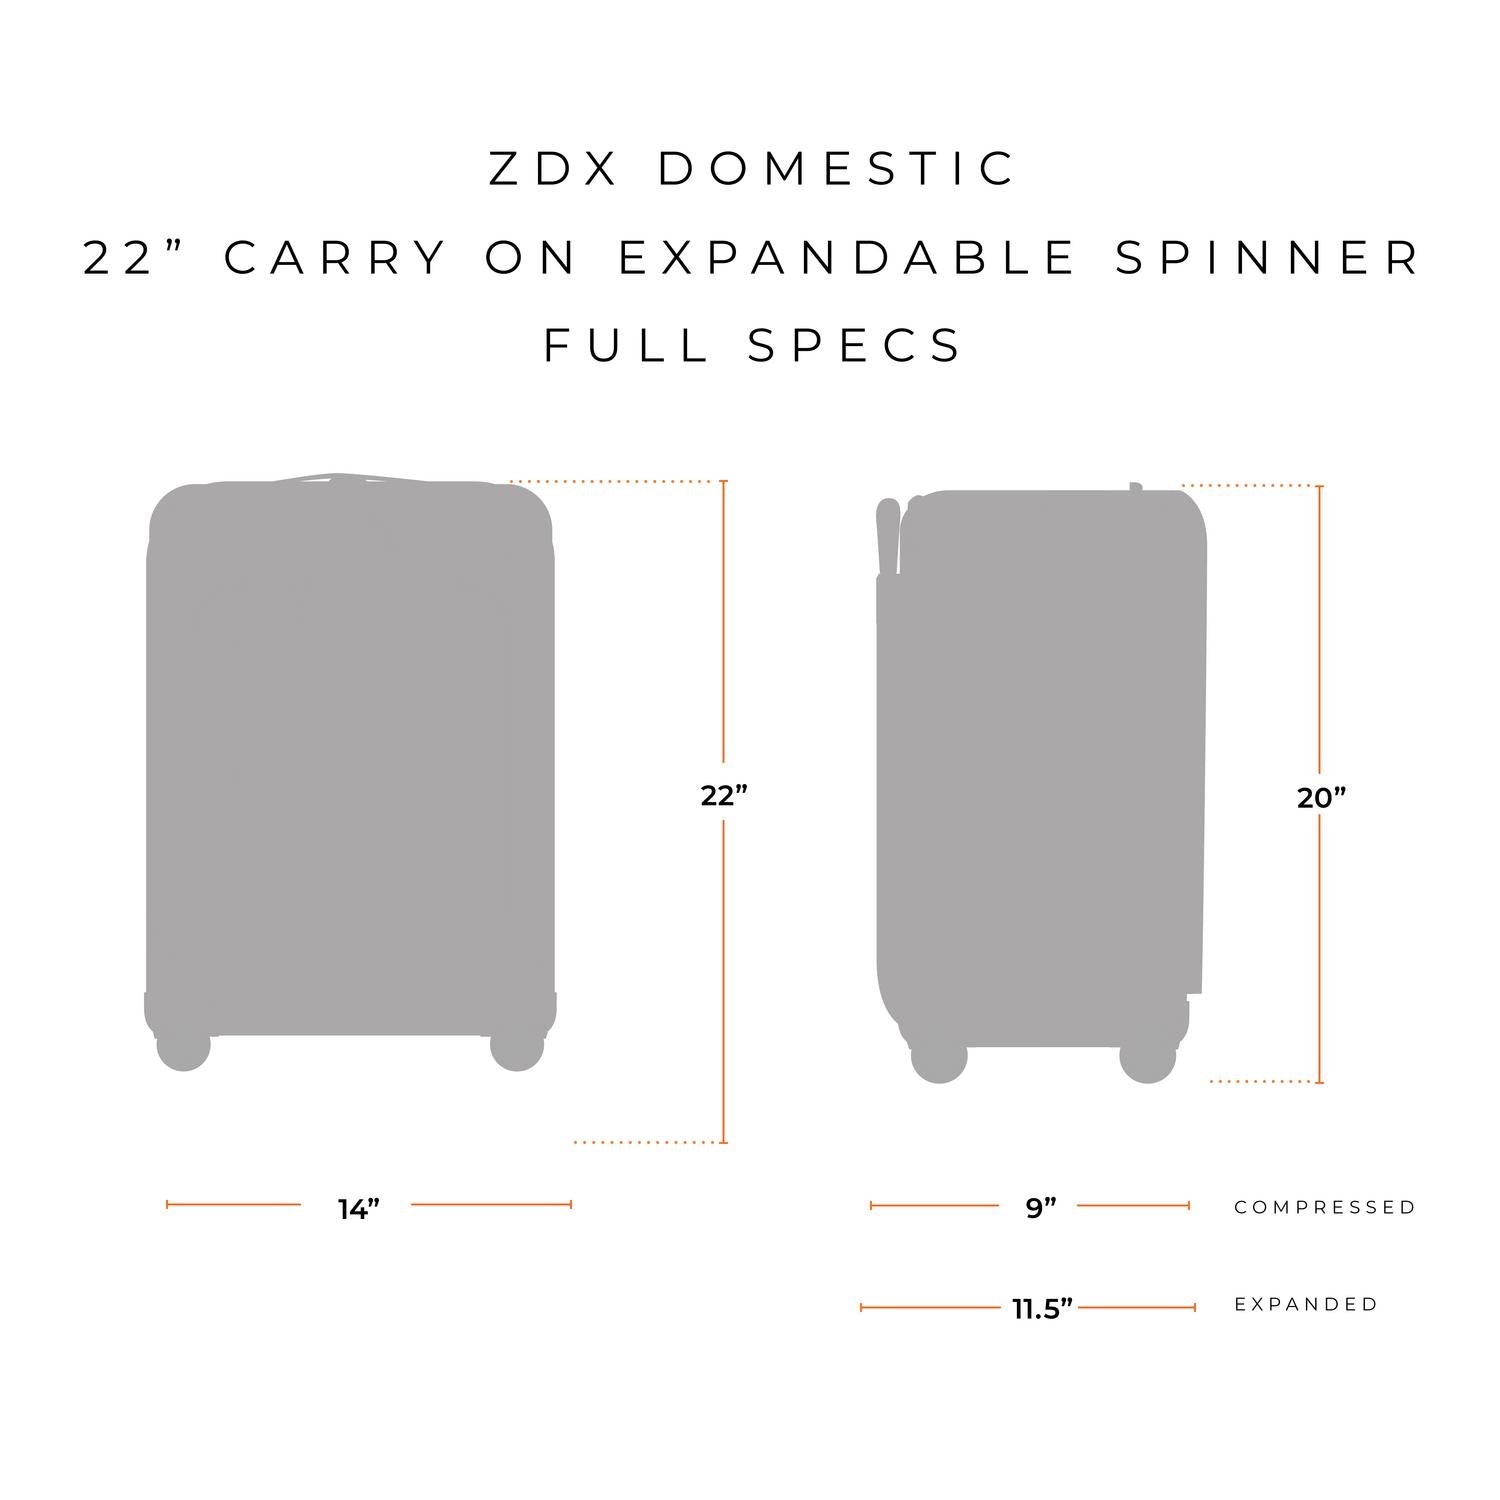 ZDX Domestic 22" Carry-On Expandable Spinner Full Specs, 14"x22", 20"x9" or 11.5" expanded  #color_hunter #color_black #color_ocean